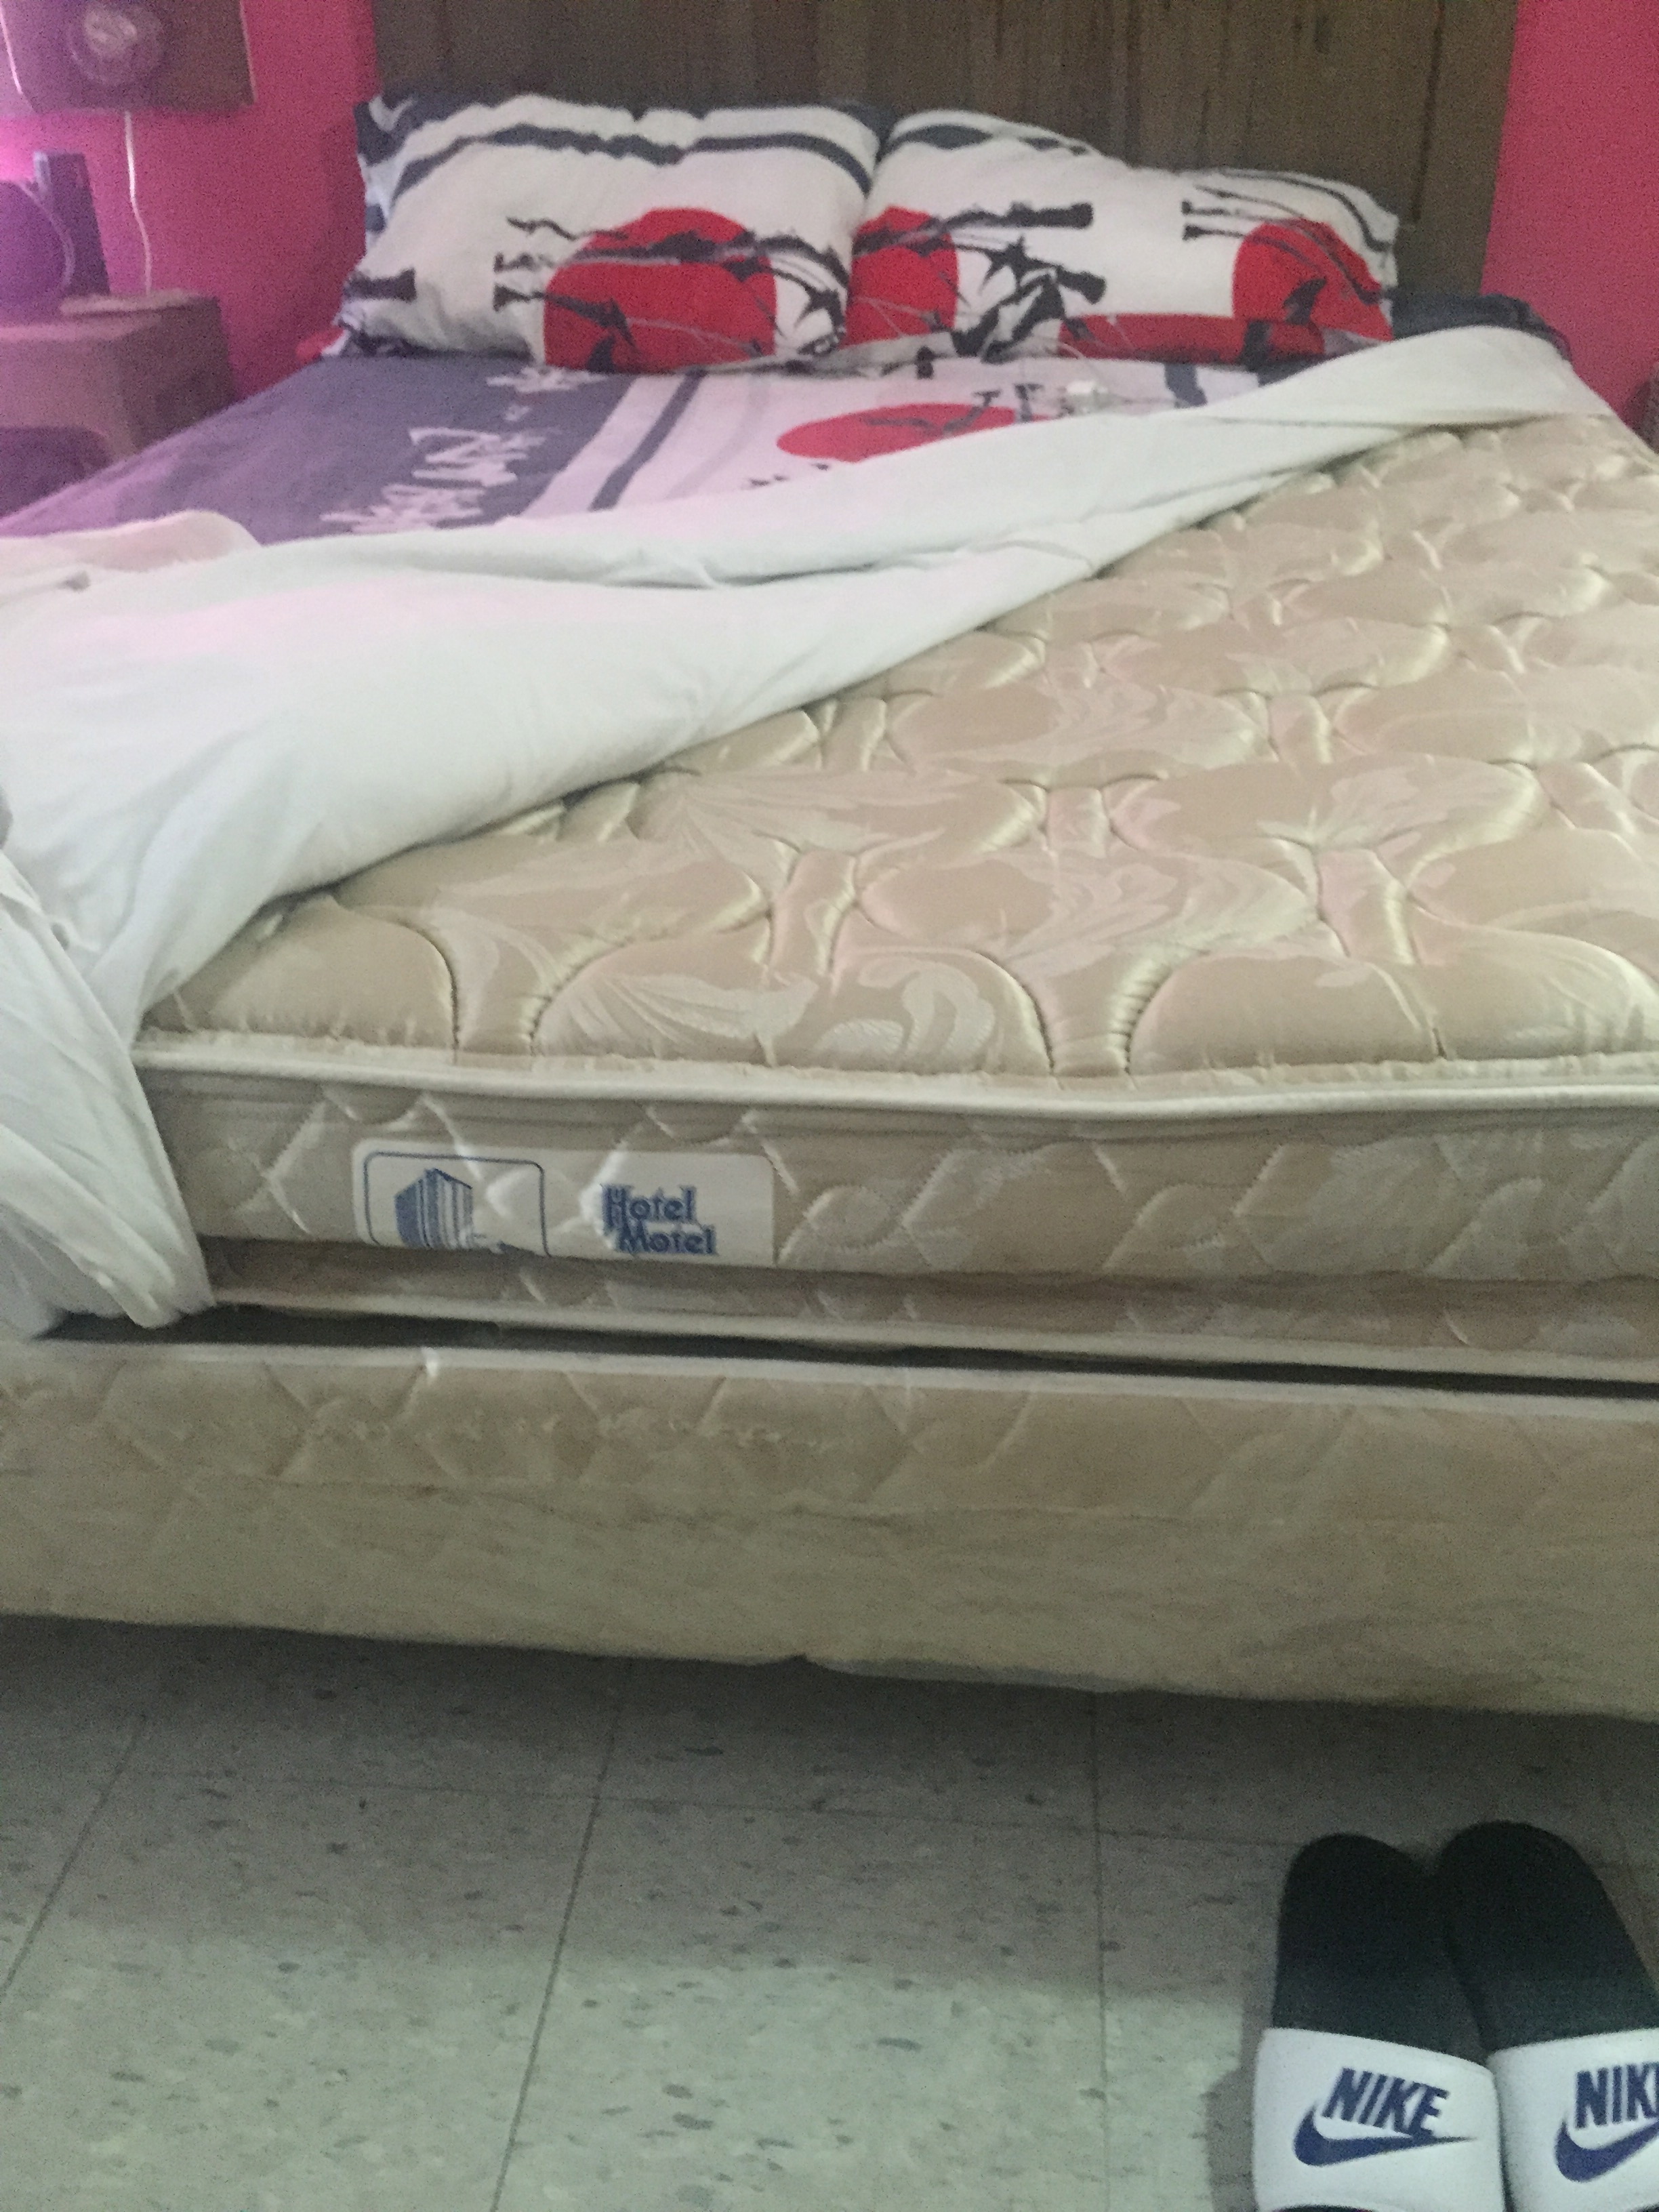 This is a photo of the bed